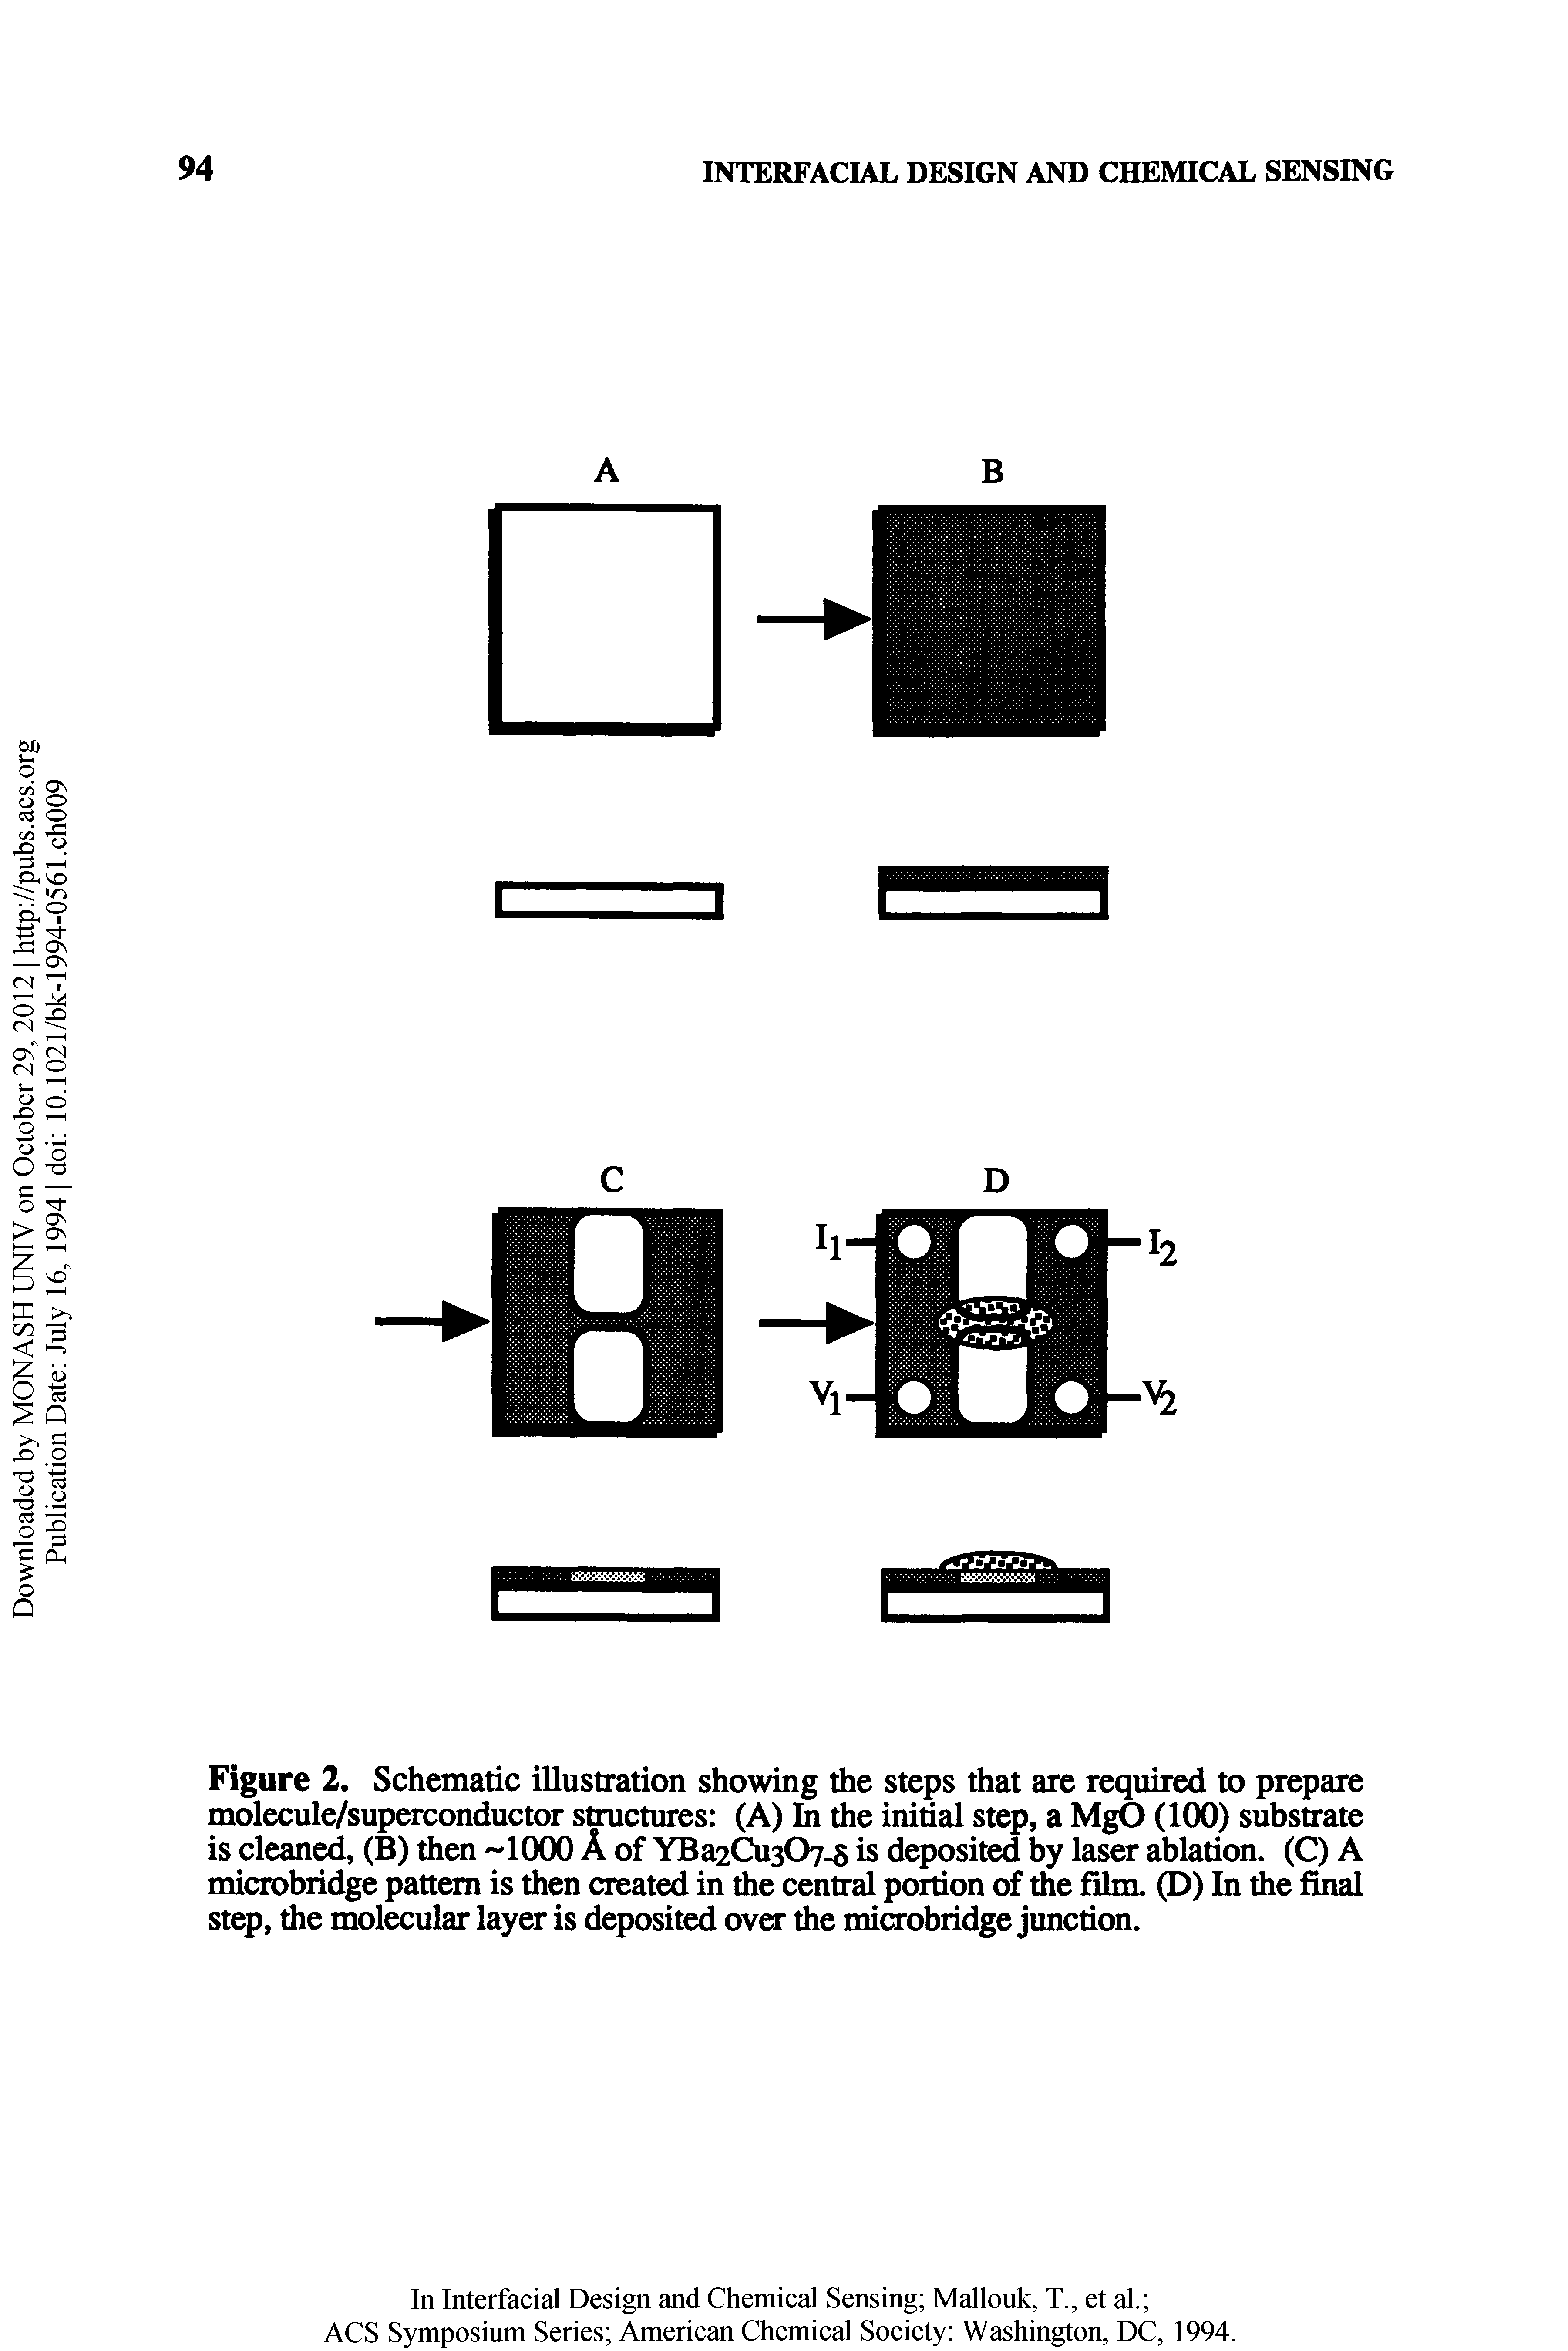 Figure 2. Schematic illustration showing the steps that are required to prepare molecule/superconductor structures (A) hi the initial step, a MgO (100) substrate is cleaned, (B) then -KXX) A of YBa2Cu3(>7-5 is deposited by laser ablation. (C) A microbridge pattern is then created in the central portion of the film. (D) In the final step, the molecular layer is deposited over die microbridge junction.